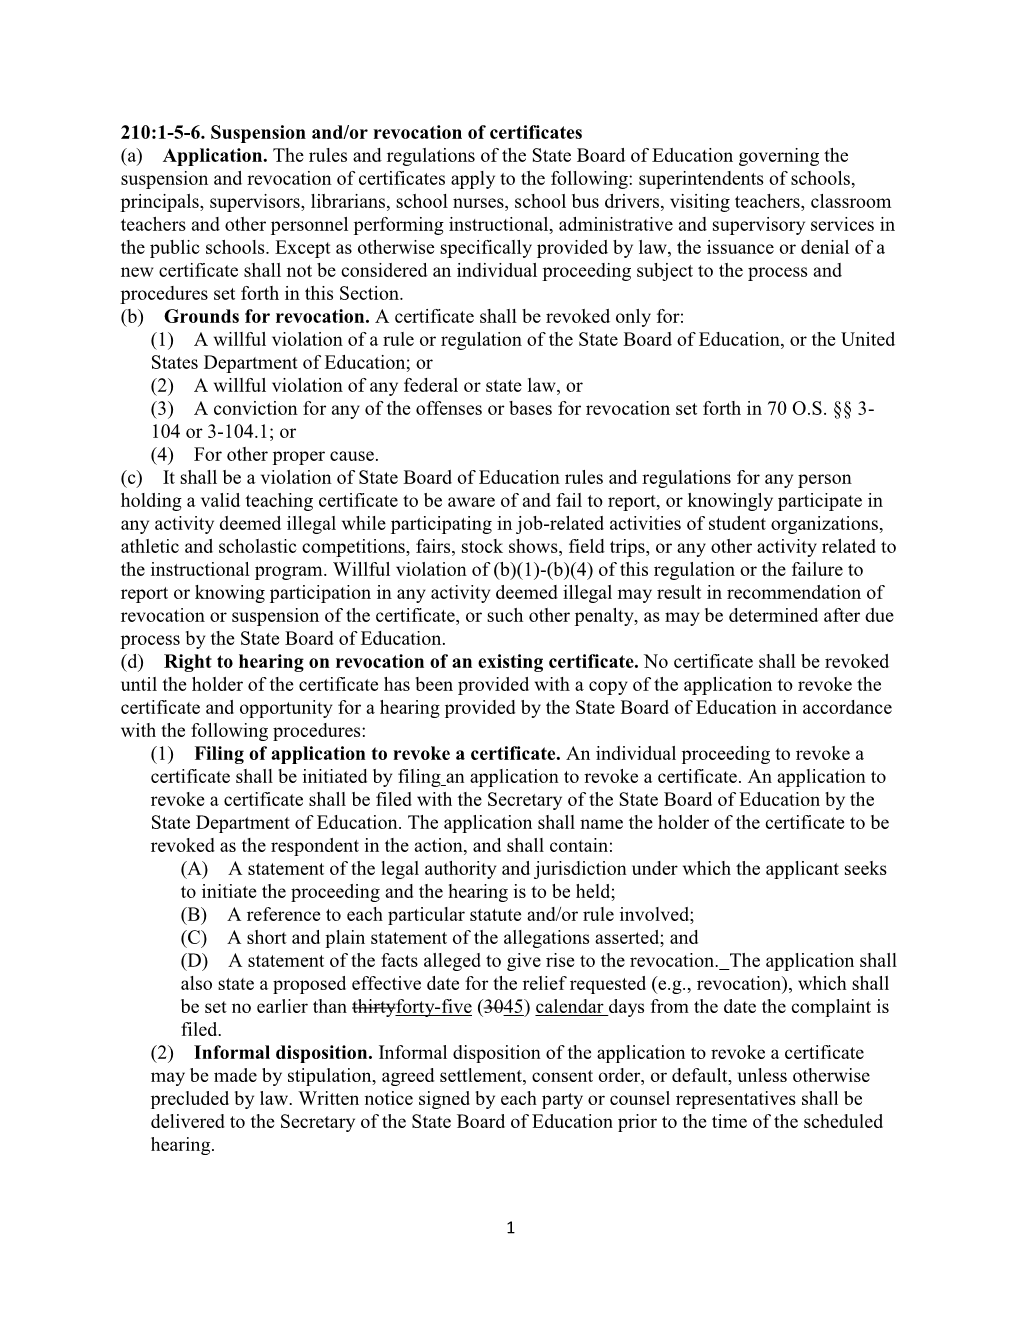 210:1-5-6. Suspension And/Or Revocation of Certificates (A) Application